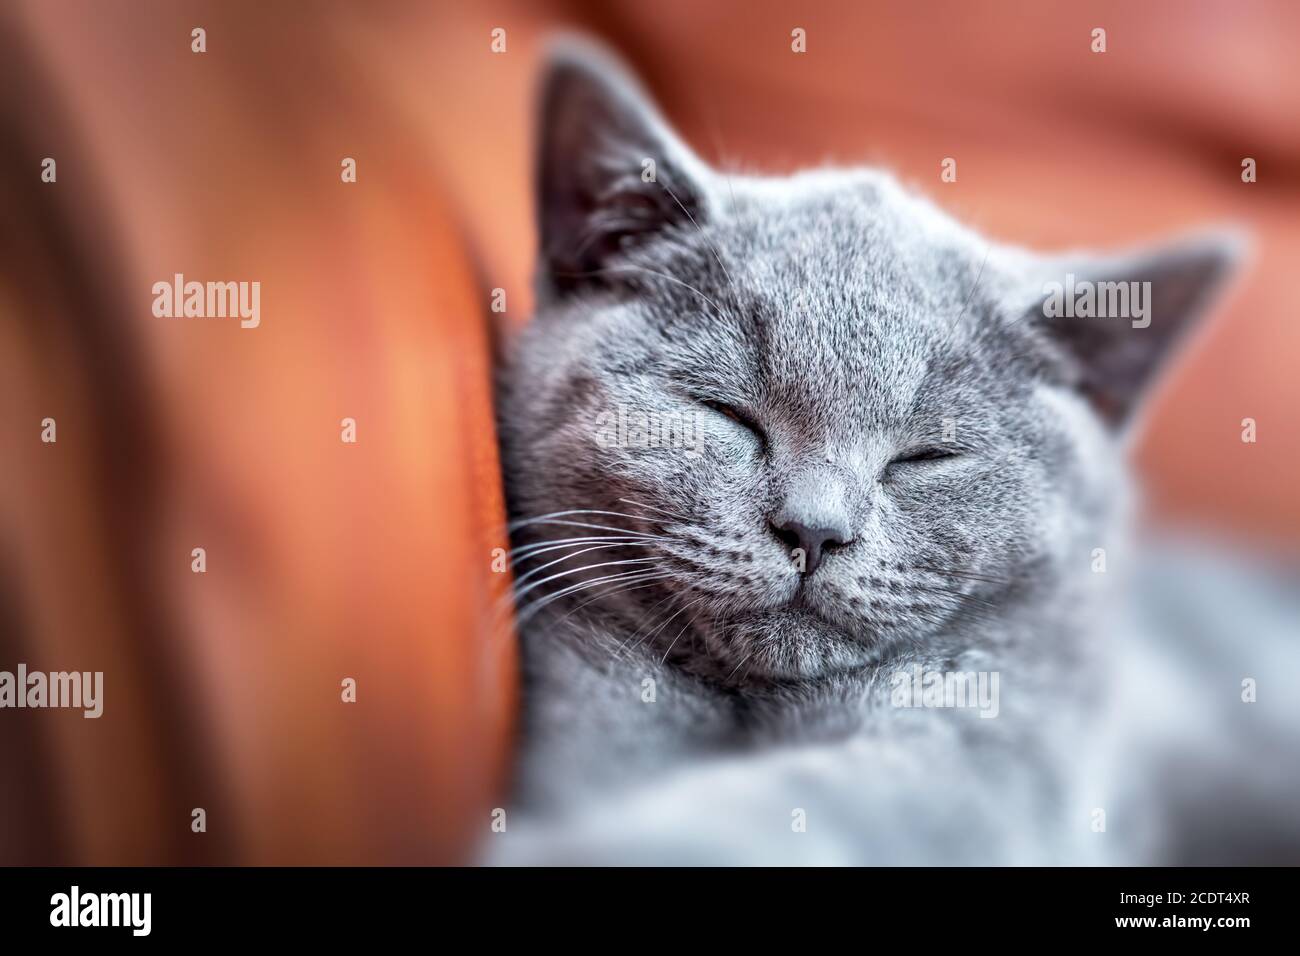 Young cute cat resting on leather sofa. The British Shorthair kitten with blue gray fur Stock Photo